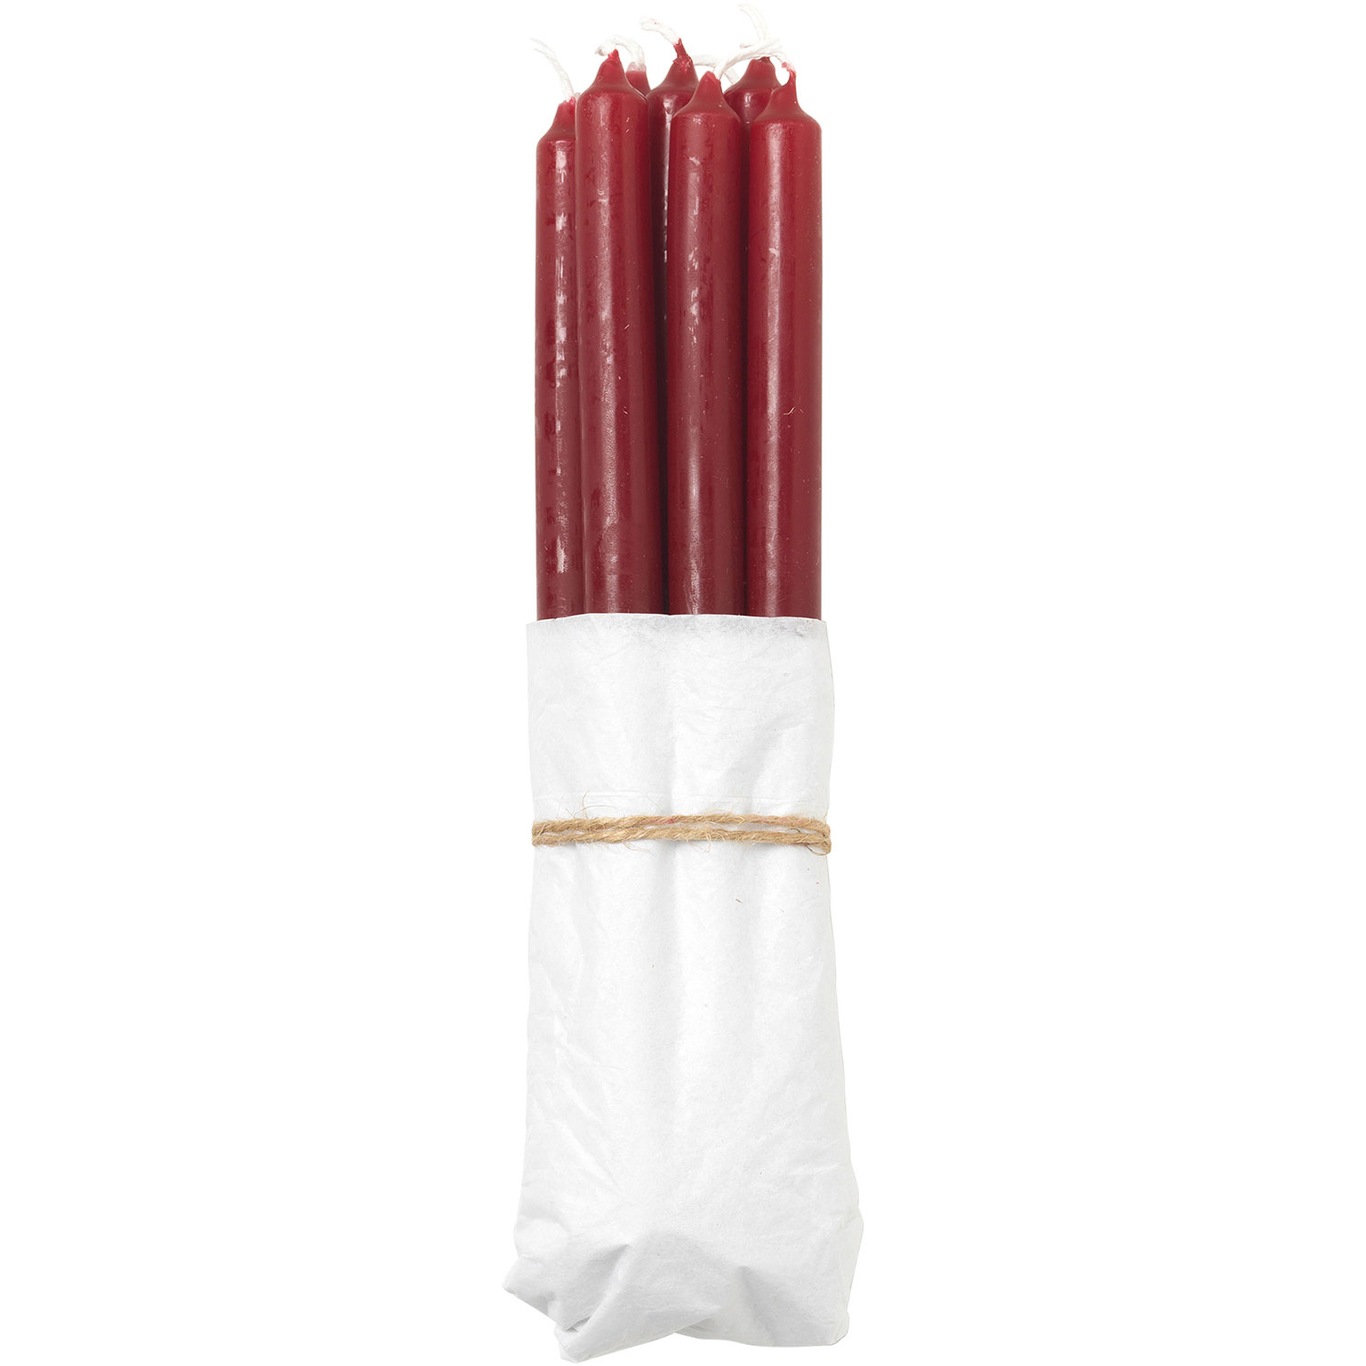 Candle 19,4 cm 8-pack, Burgundy